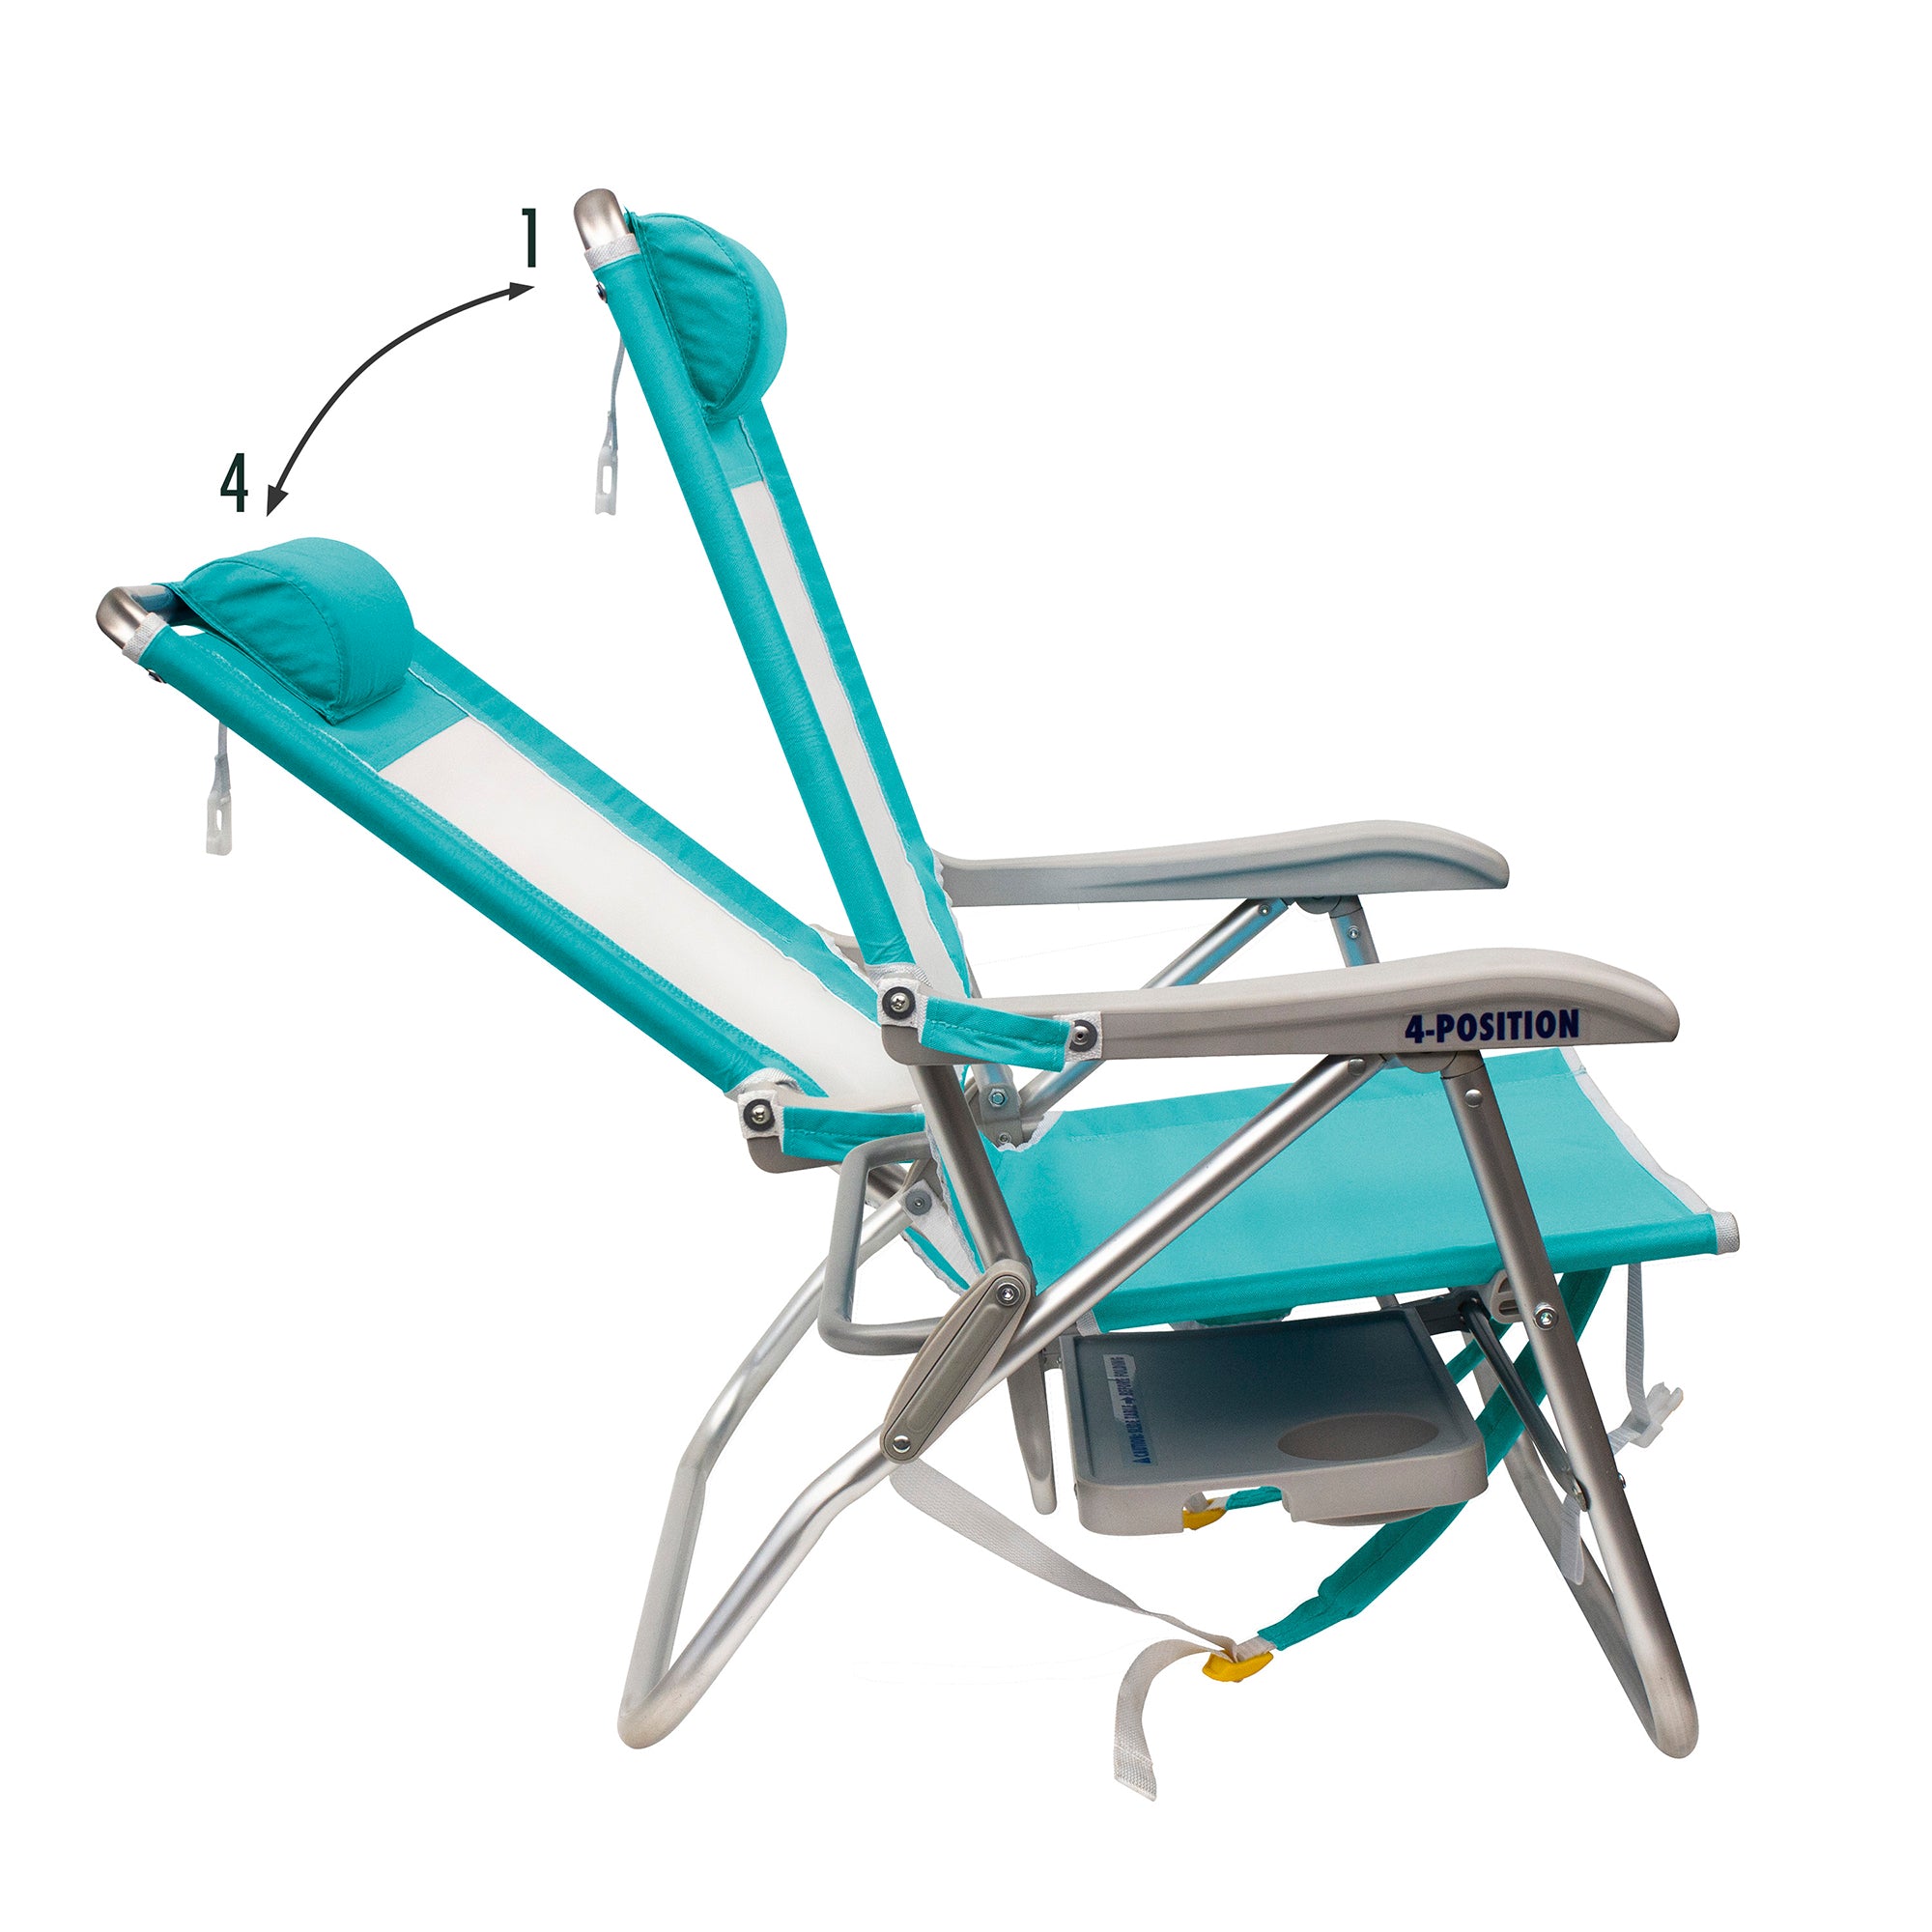 Big Surf with Slide Table, Seafoam Green, Recline